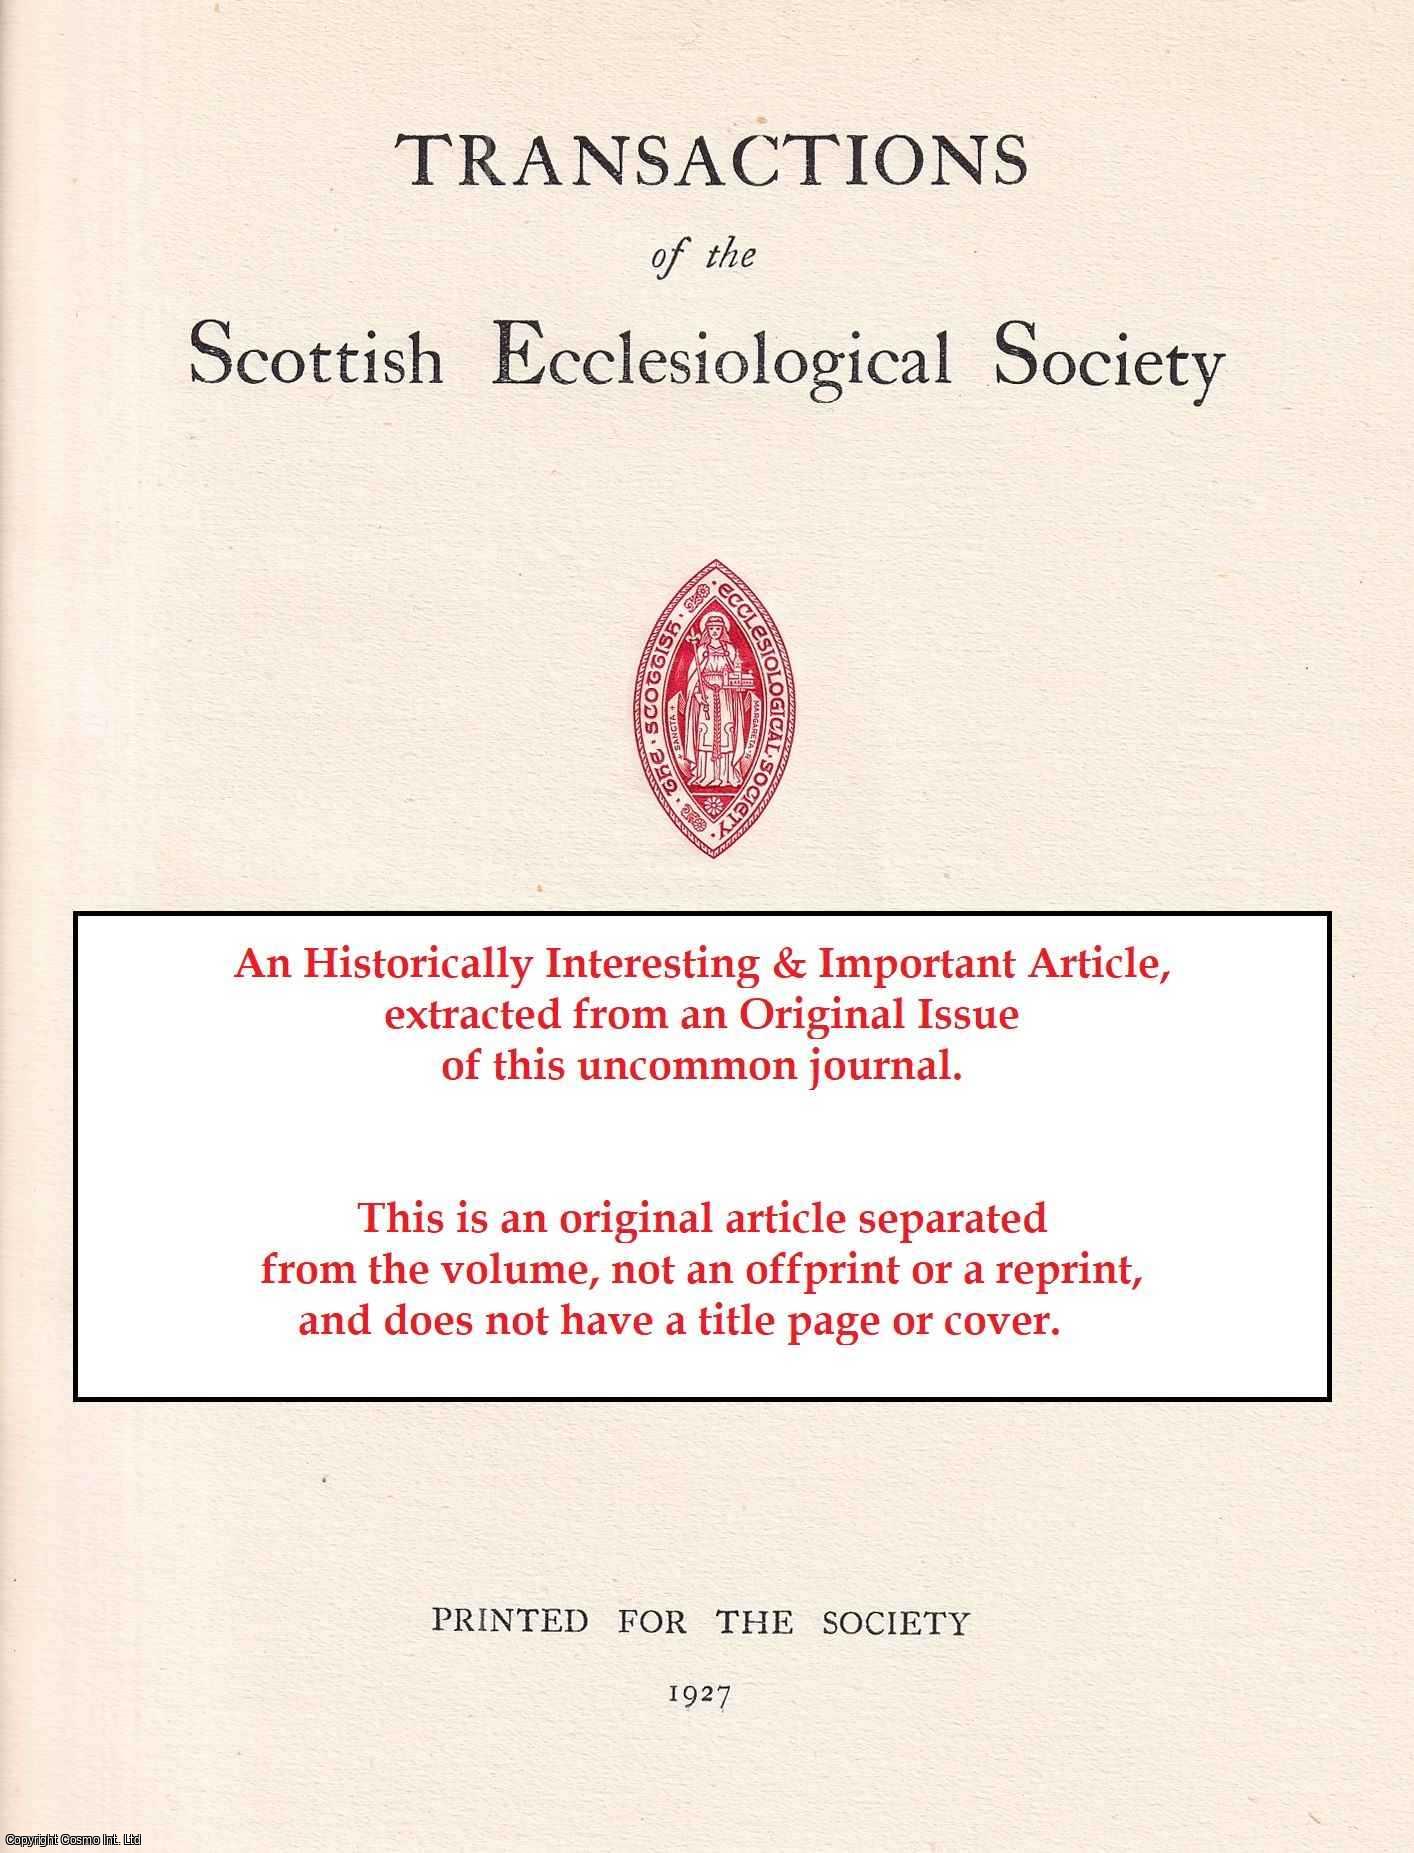 Rev C. Forbes Charleson - The Site of a Pre-Norman Chapel of St. Conal in Upper Nithsdale. An original article from the Transactions of the Scottish Ecclesiological Society, 1930.